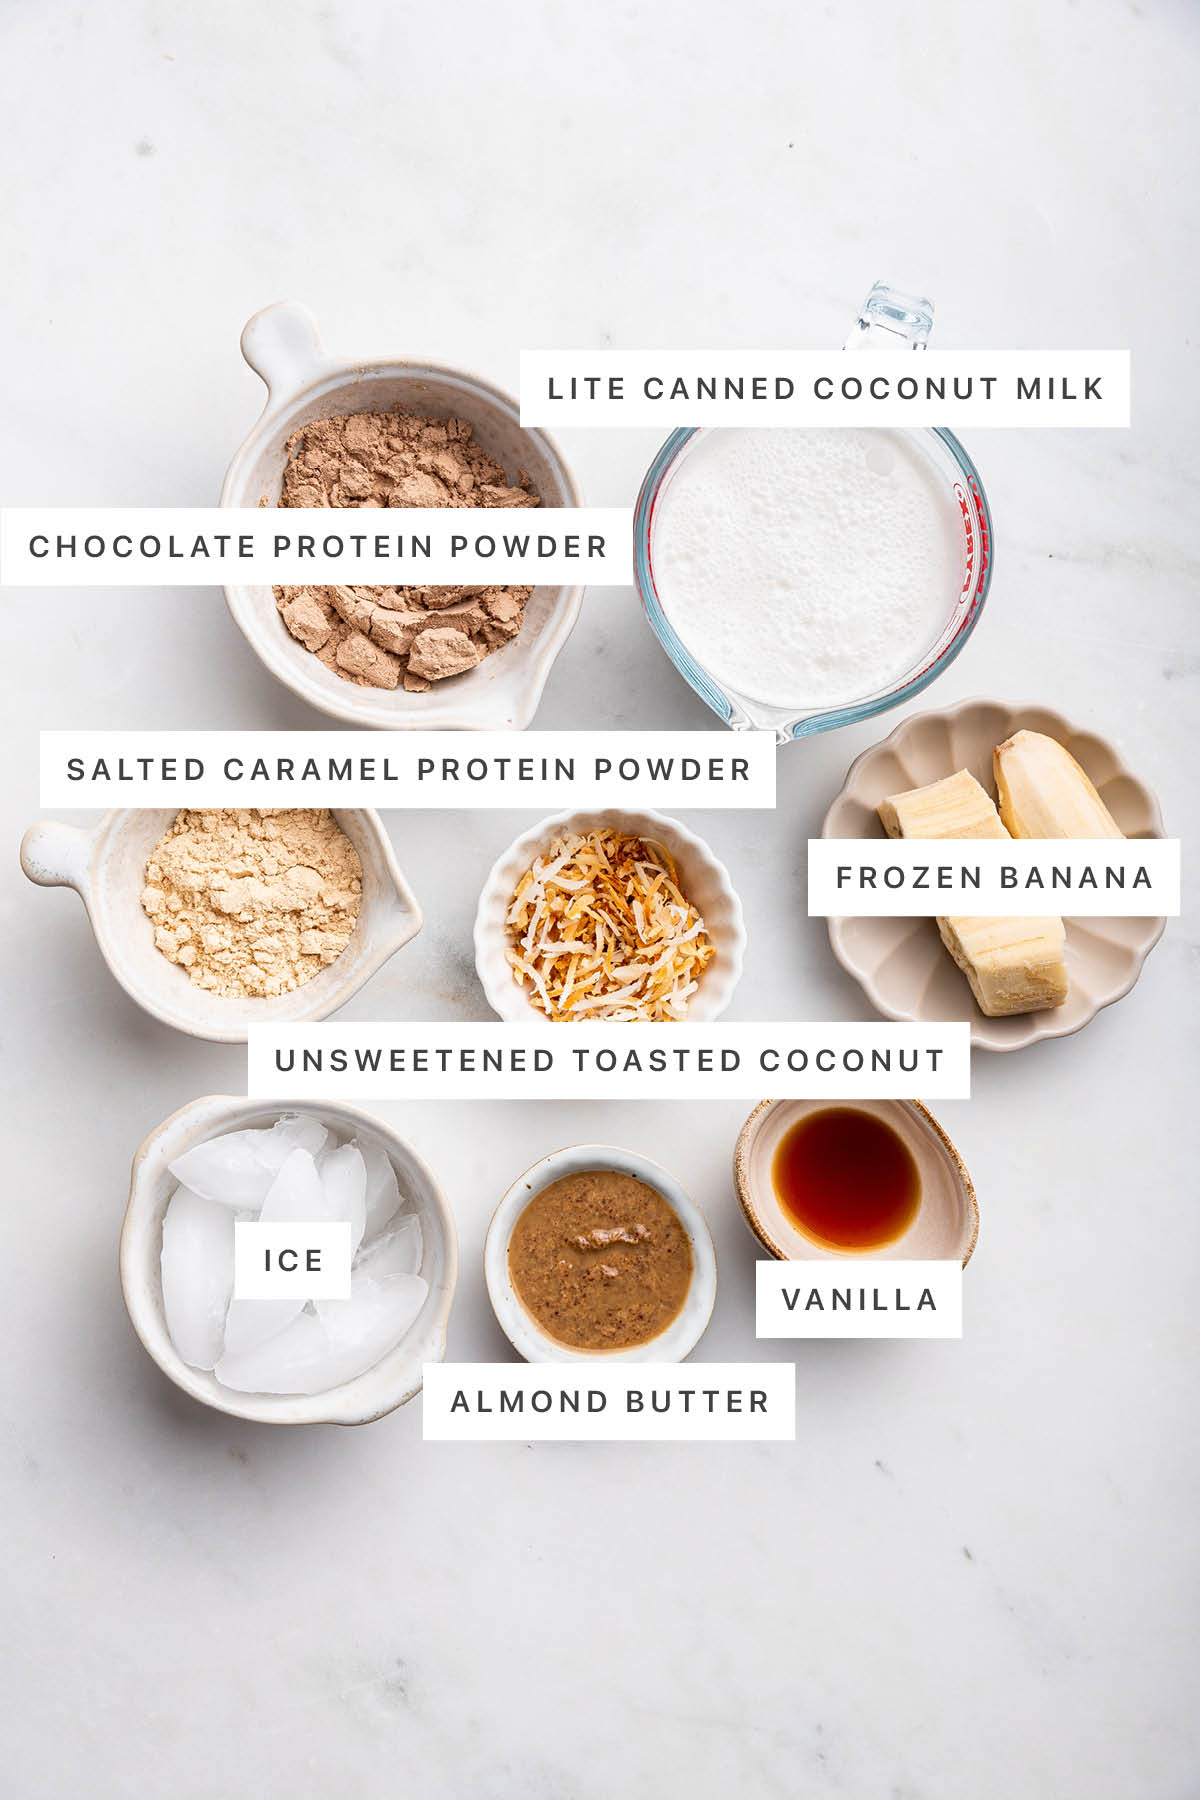 Ingredients measured out to make Samoa Protein Shake: chocolate protein powder, lite canned coconut milk, salted caramel protein powder, frozen banana, unsweetened toasted coconut, ice, almond butter and vanilla.